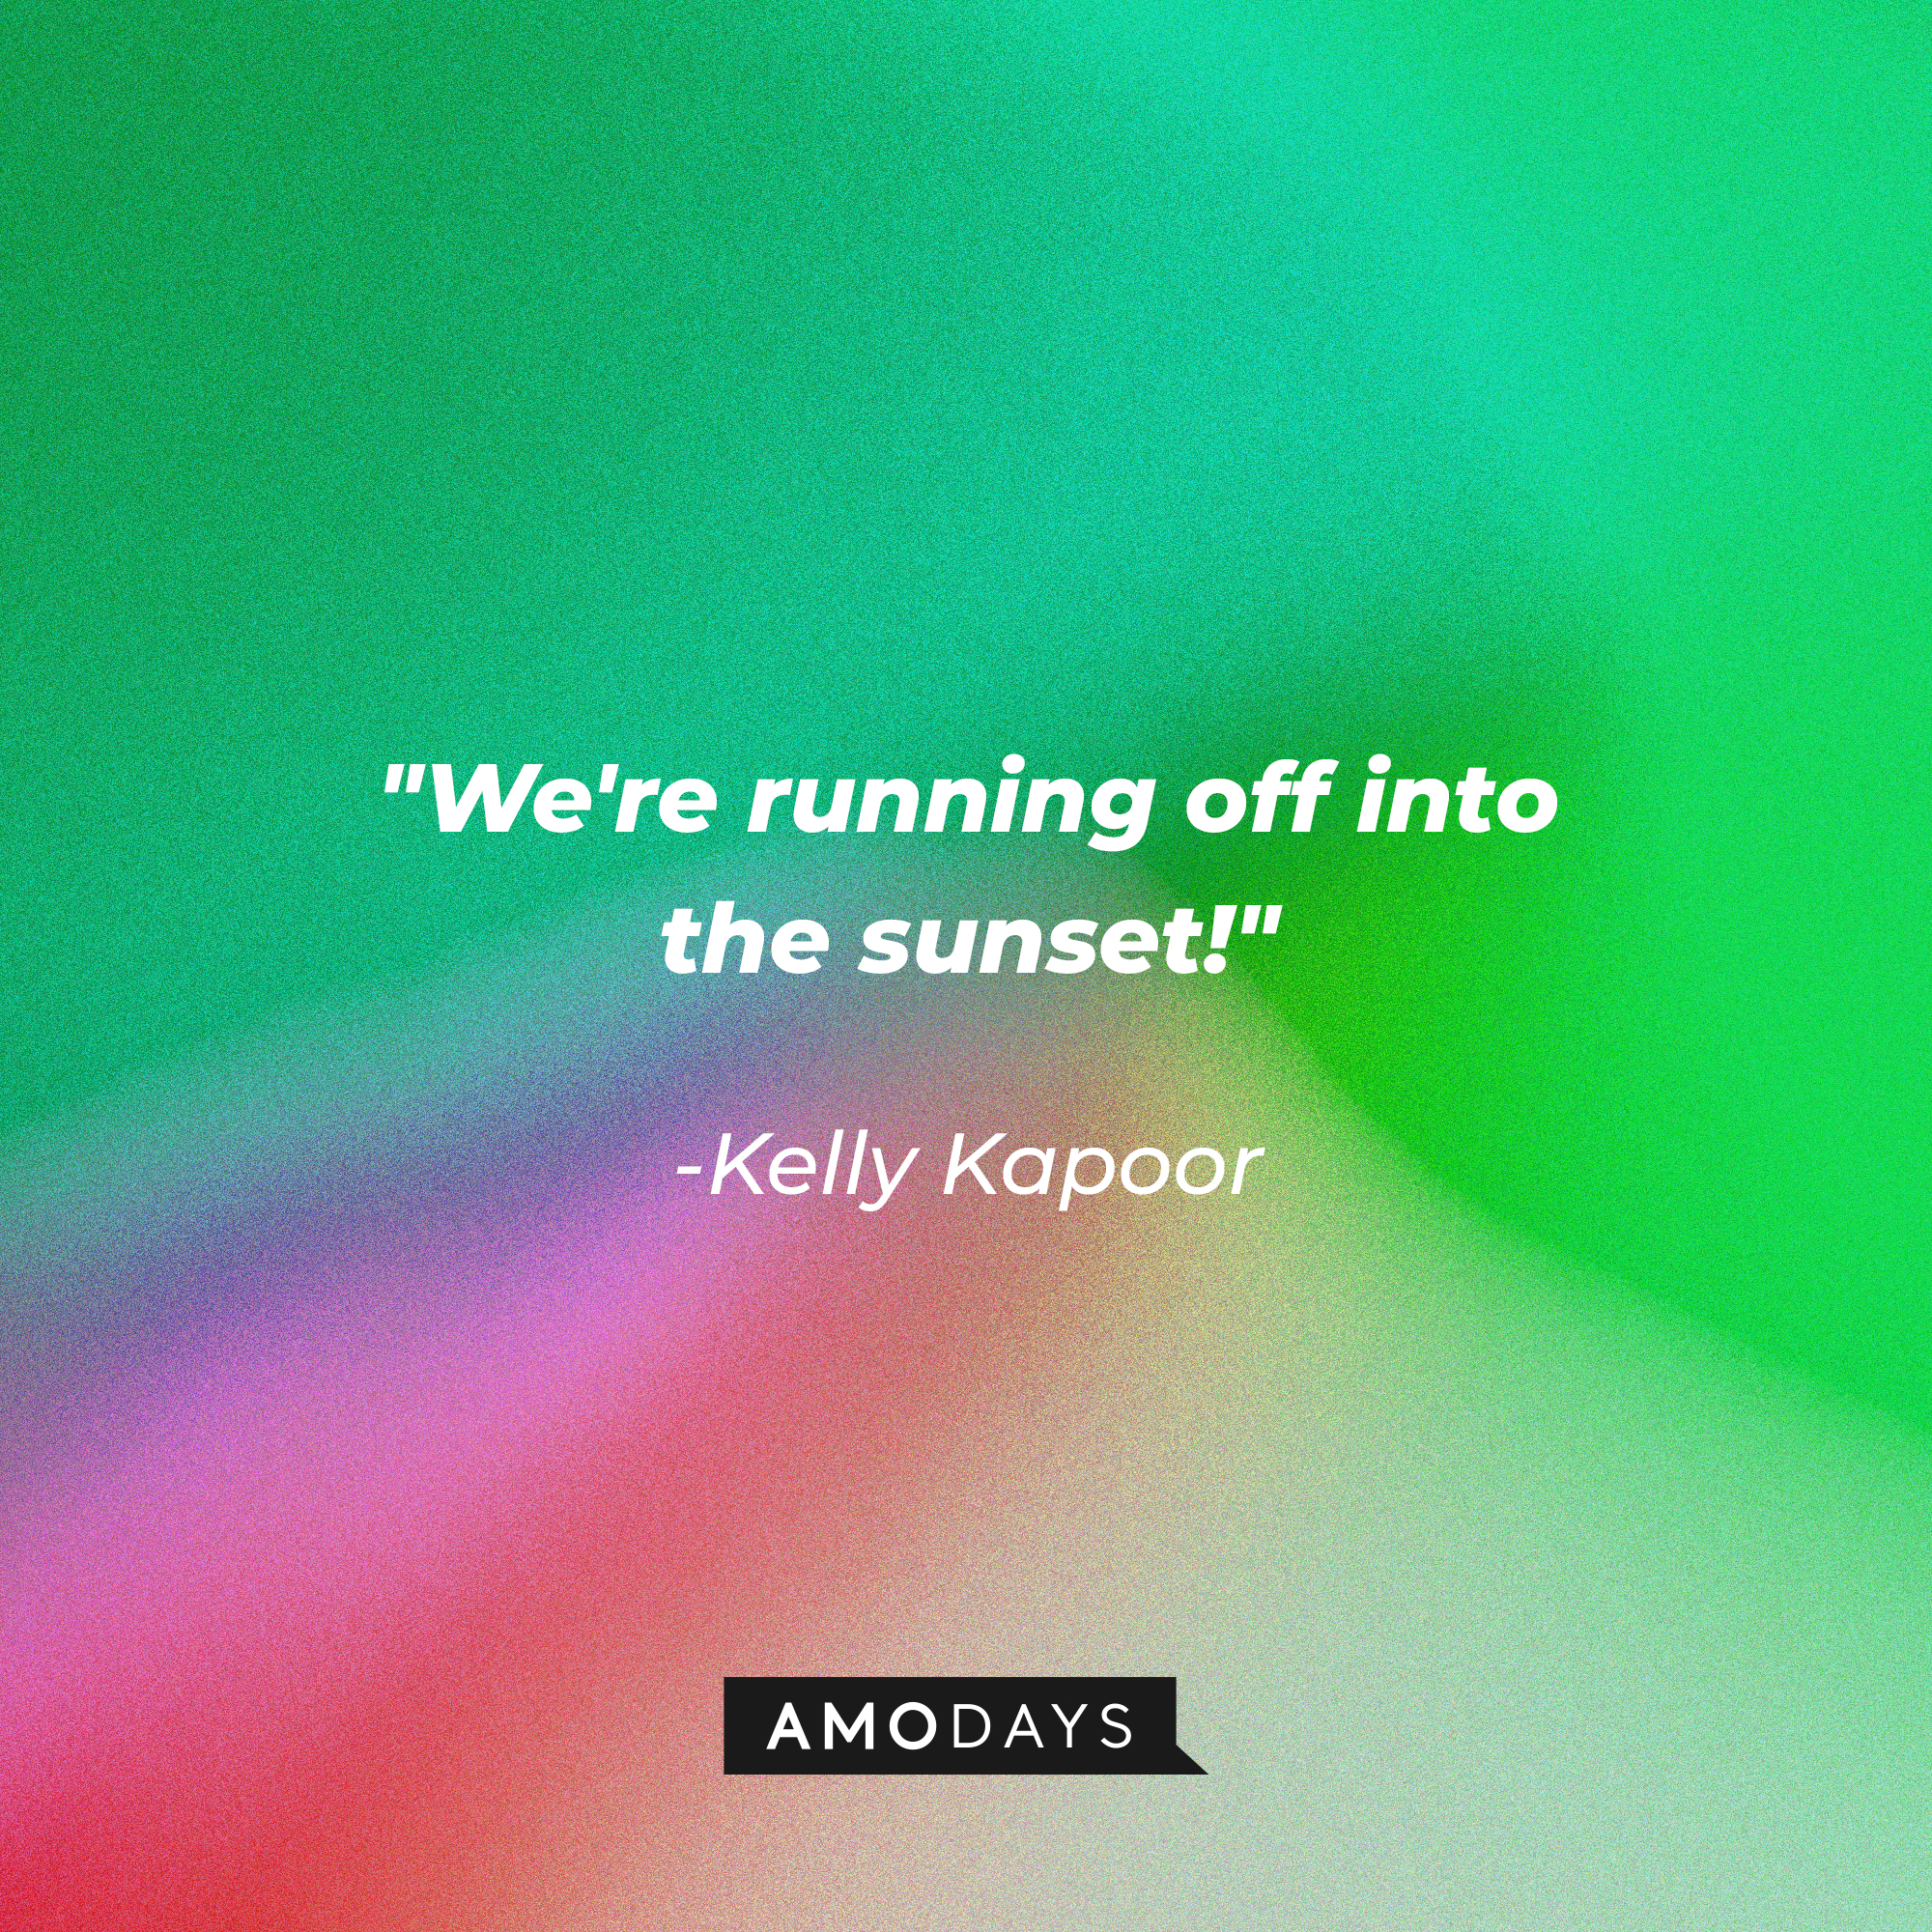 Kelly Kapoor’s quote: "We're running off into the sunset!" | Image: AmoDays